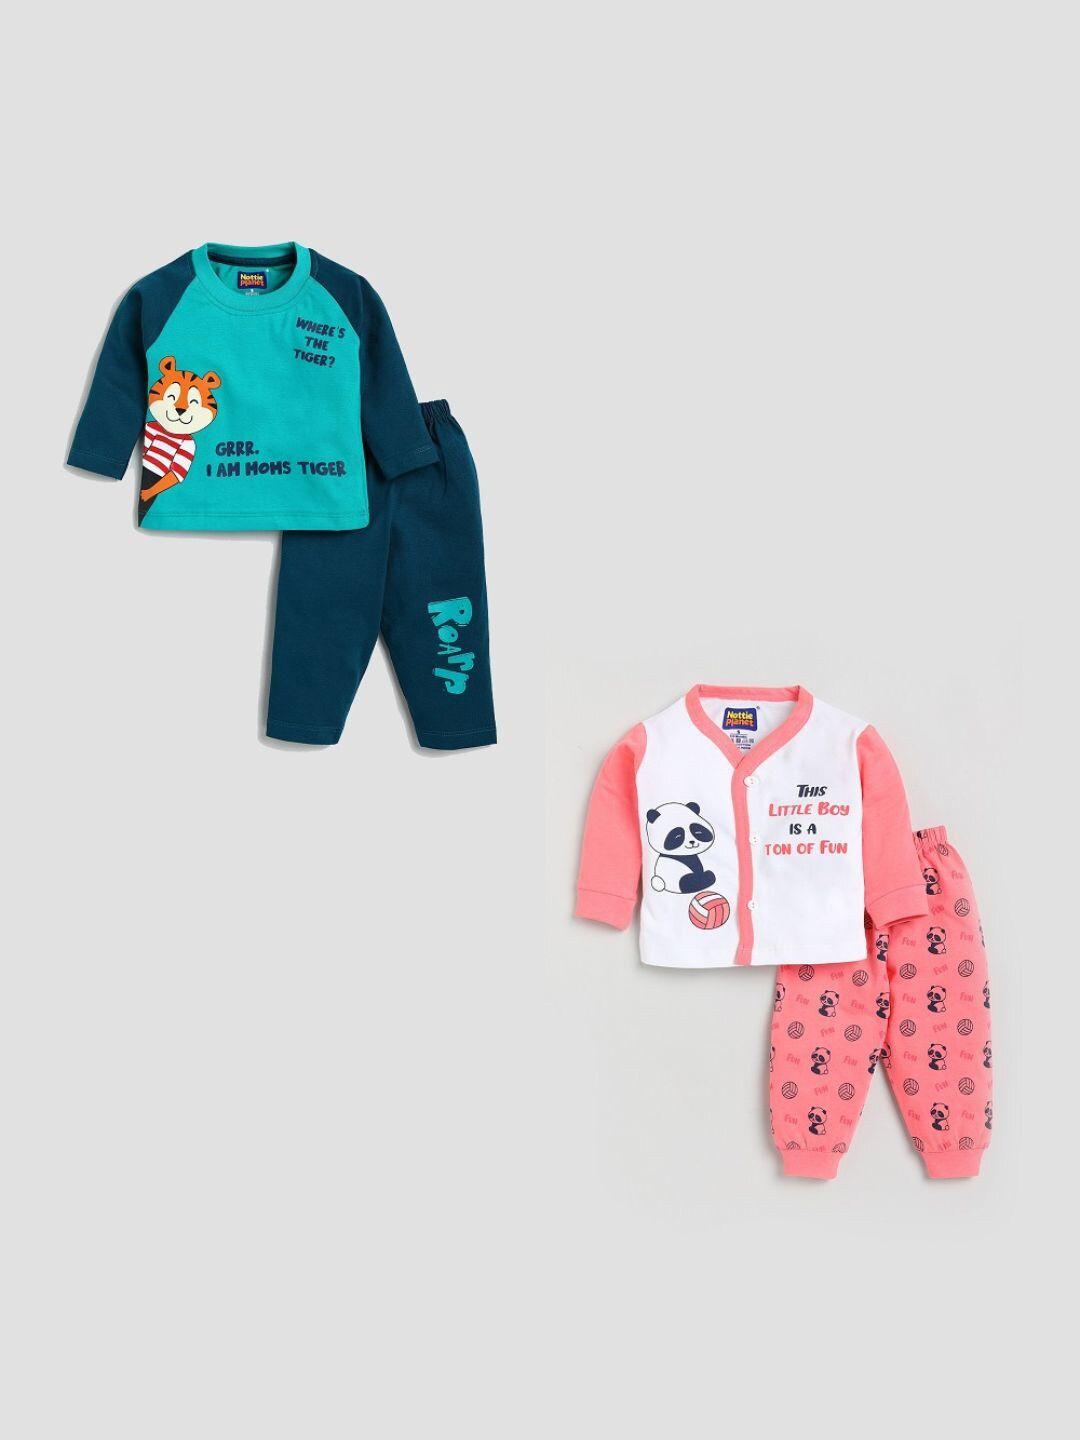 nottie planet unisex kids teal & coral printed pack of 2 pure cotton t-shirt with pyjamas